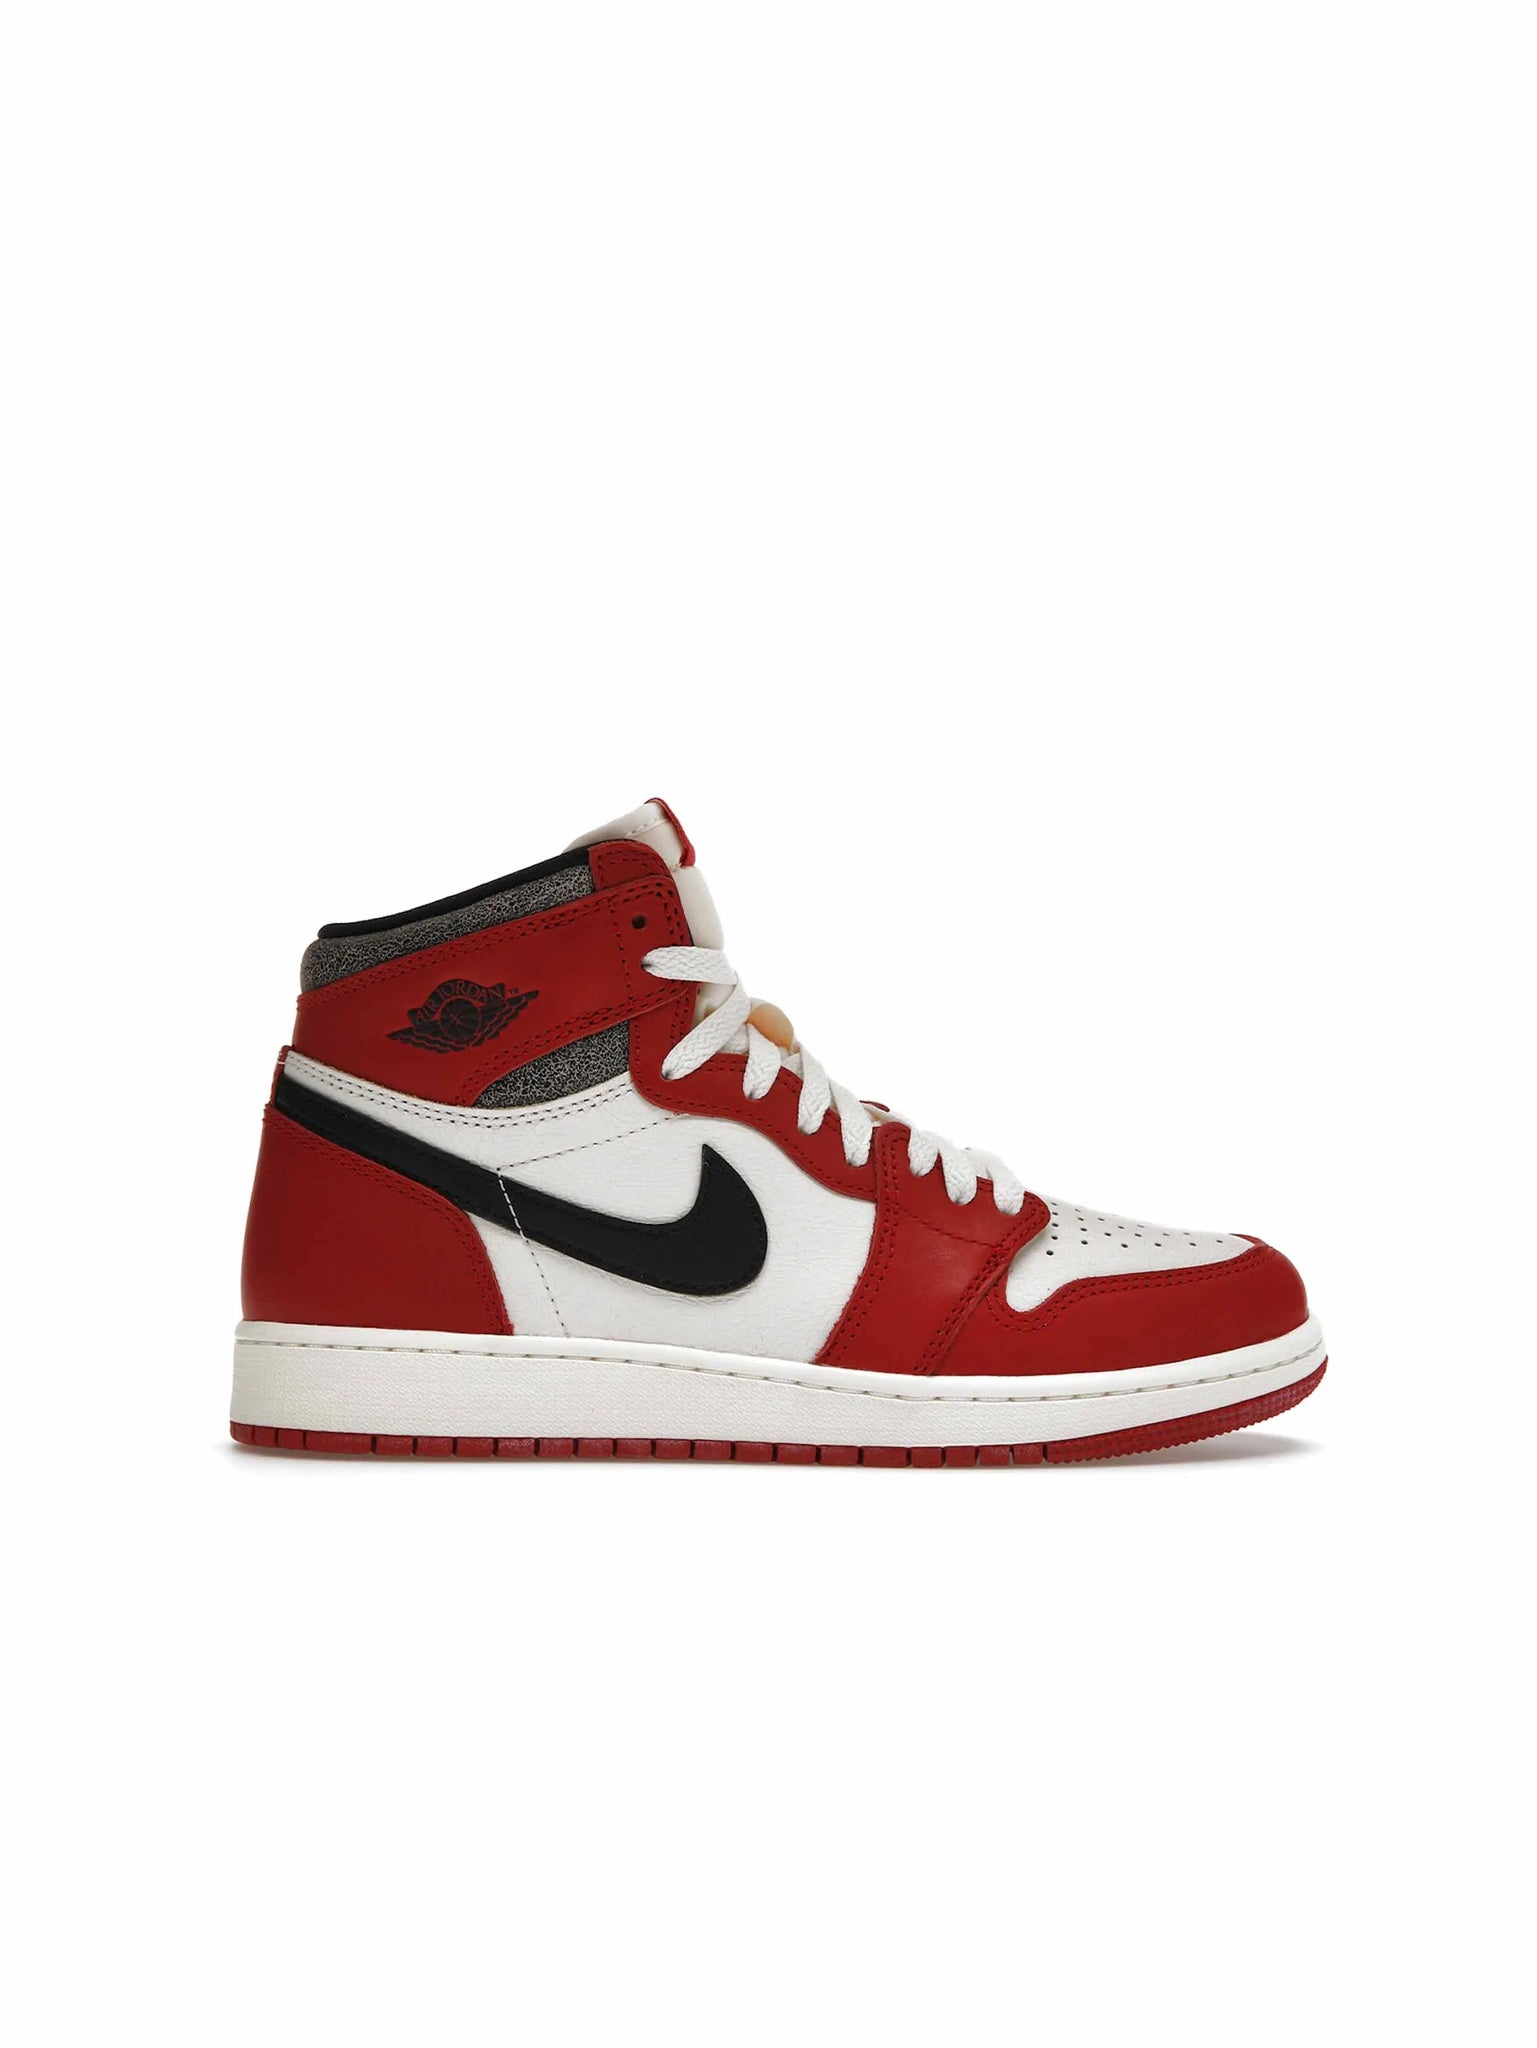 Nike Air Jordan 1 Retro High OG Chicago Lost and Found (GS) - Prior